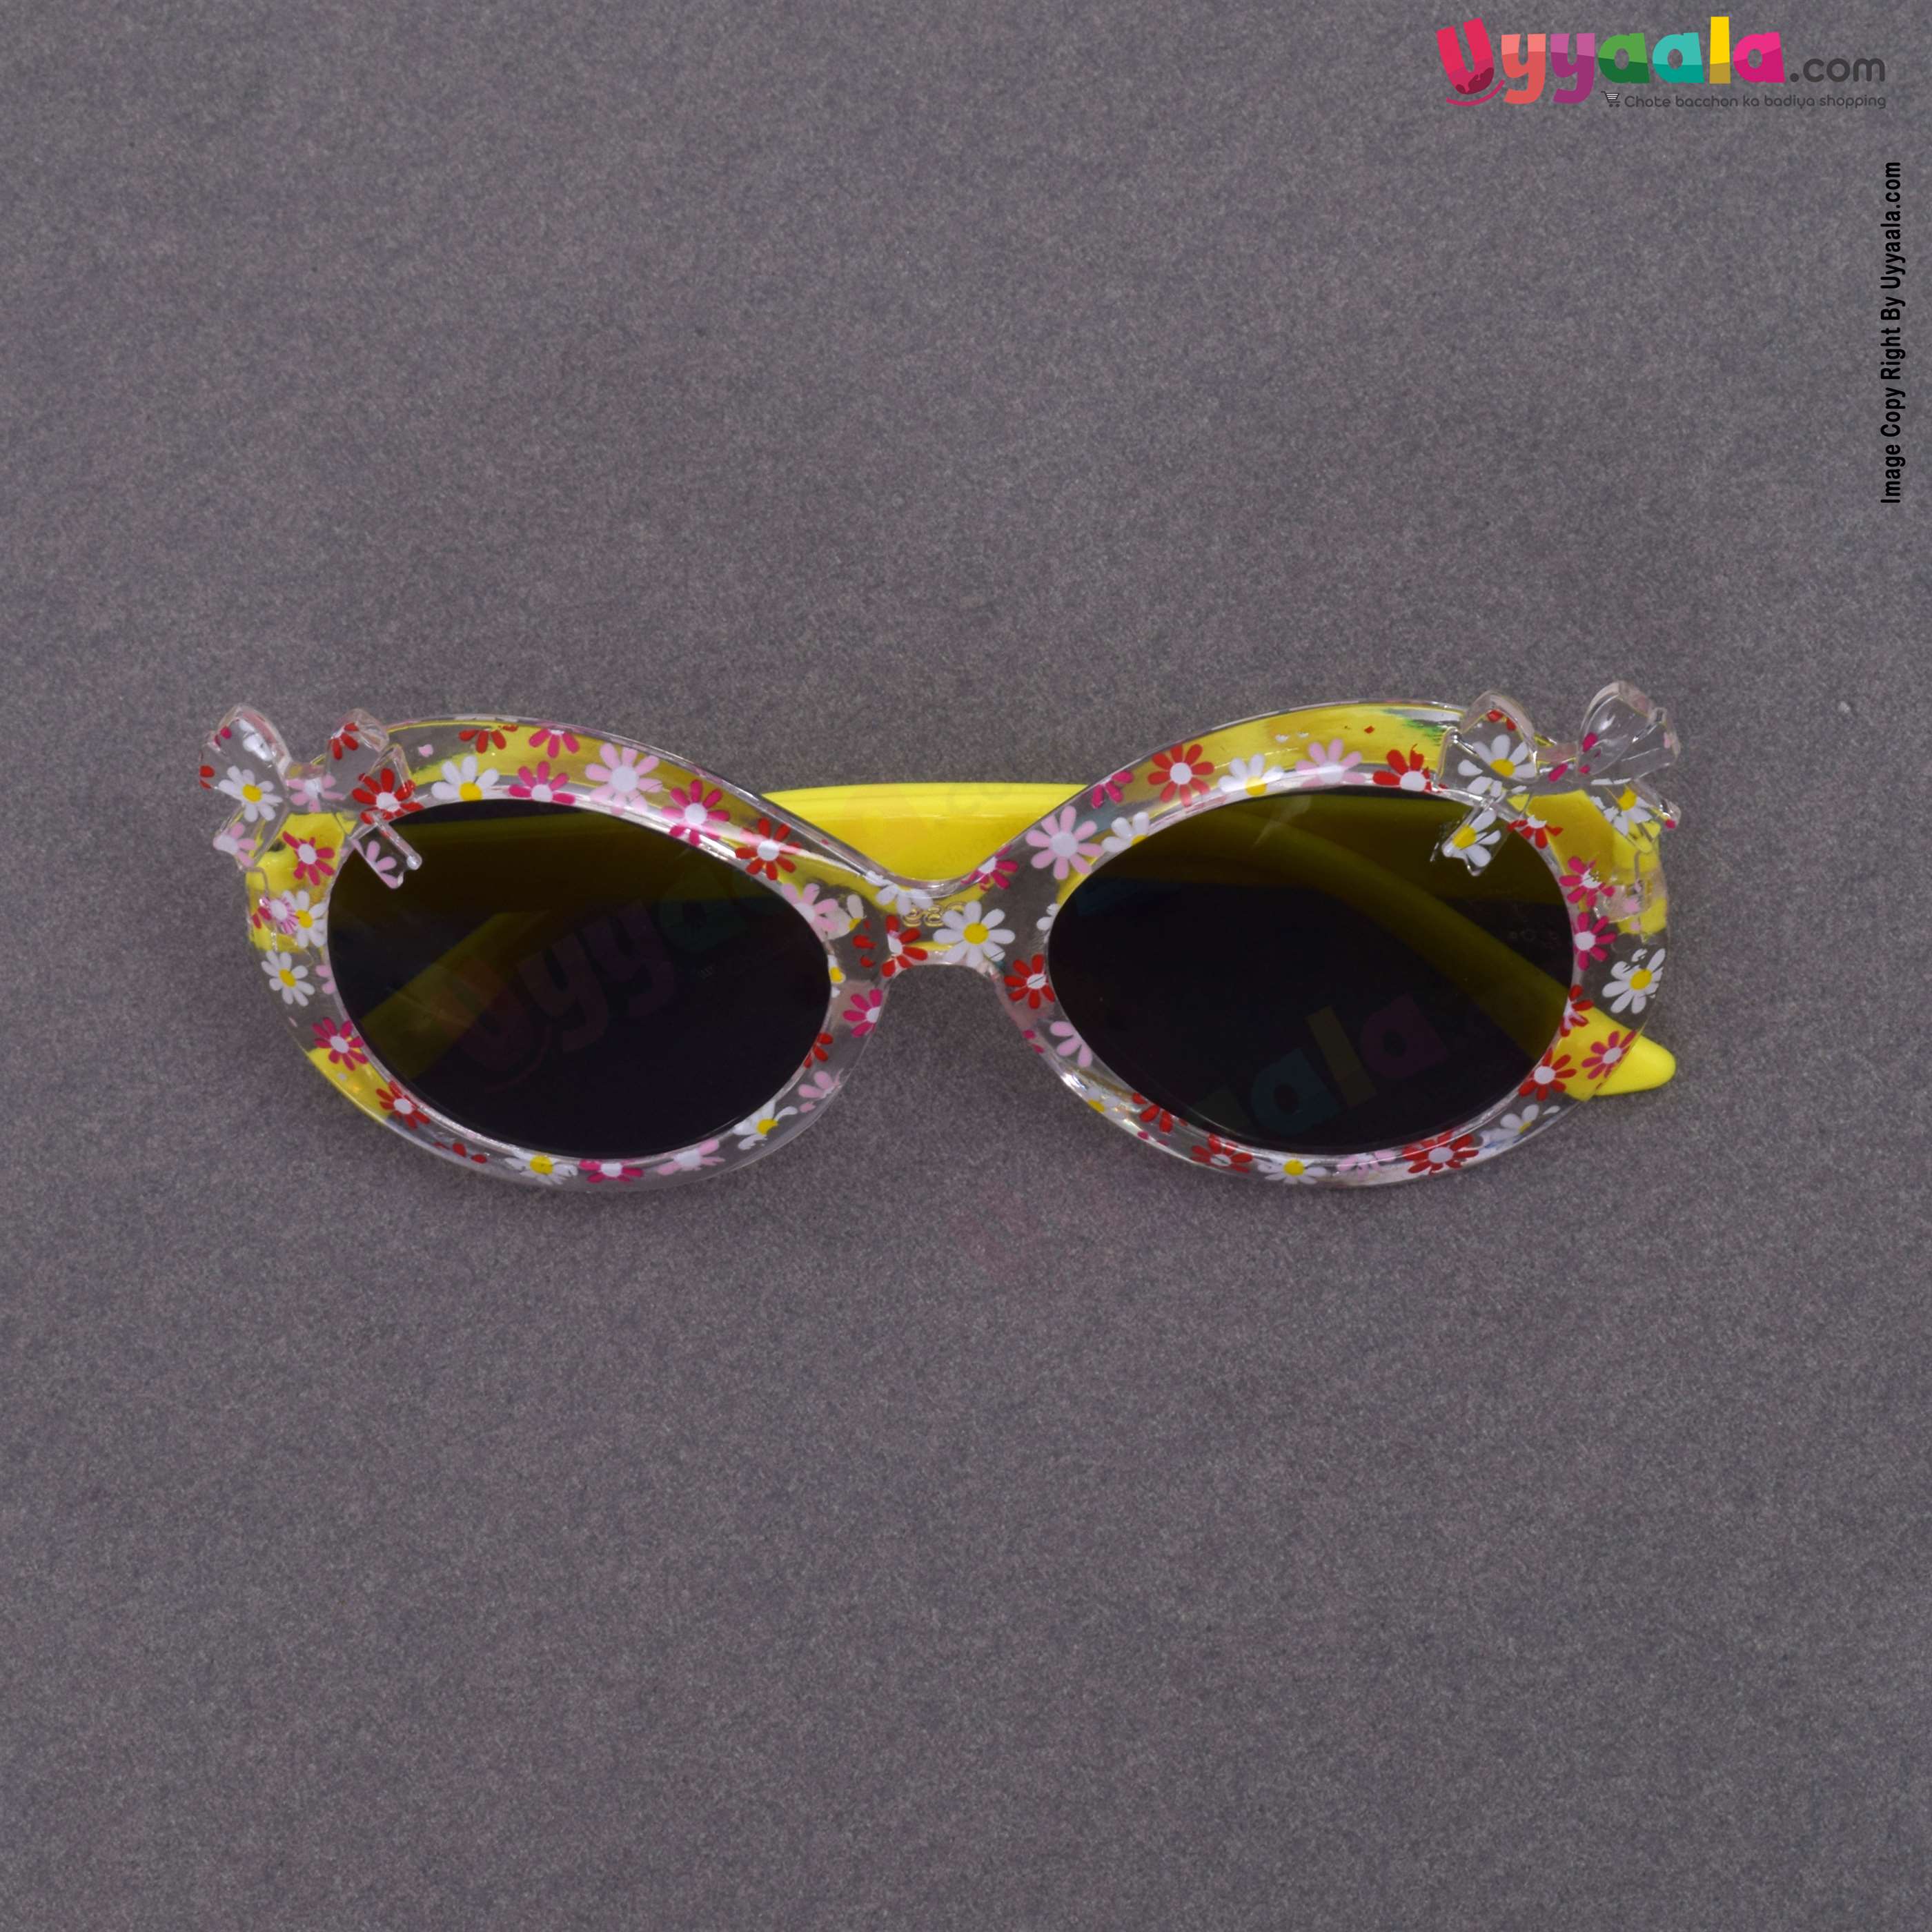 Stylish cat-eye tinted sunglasses for kids - yellow & floral print